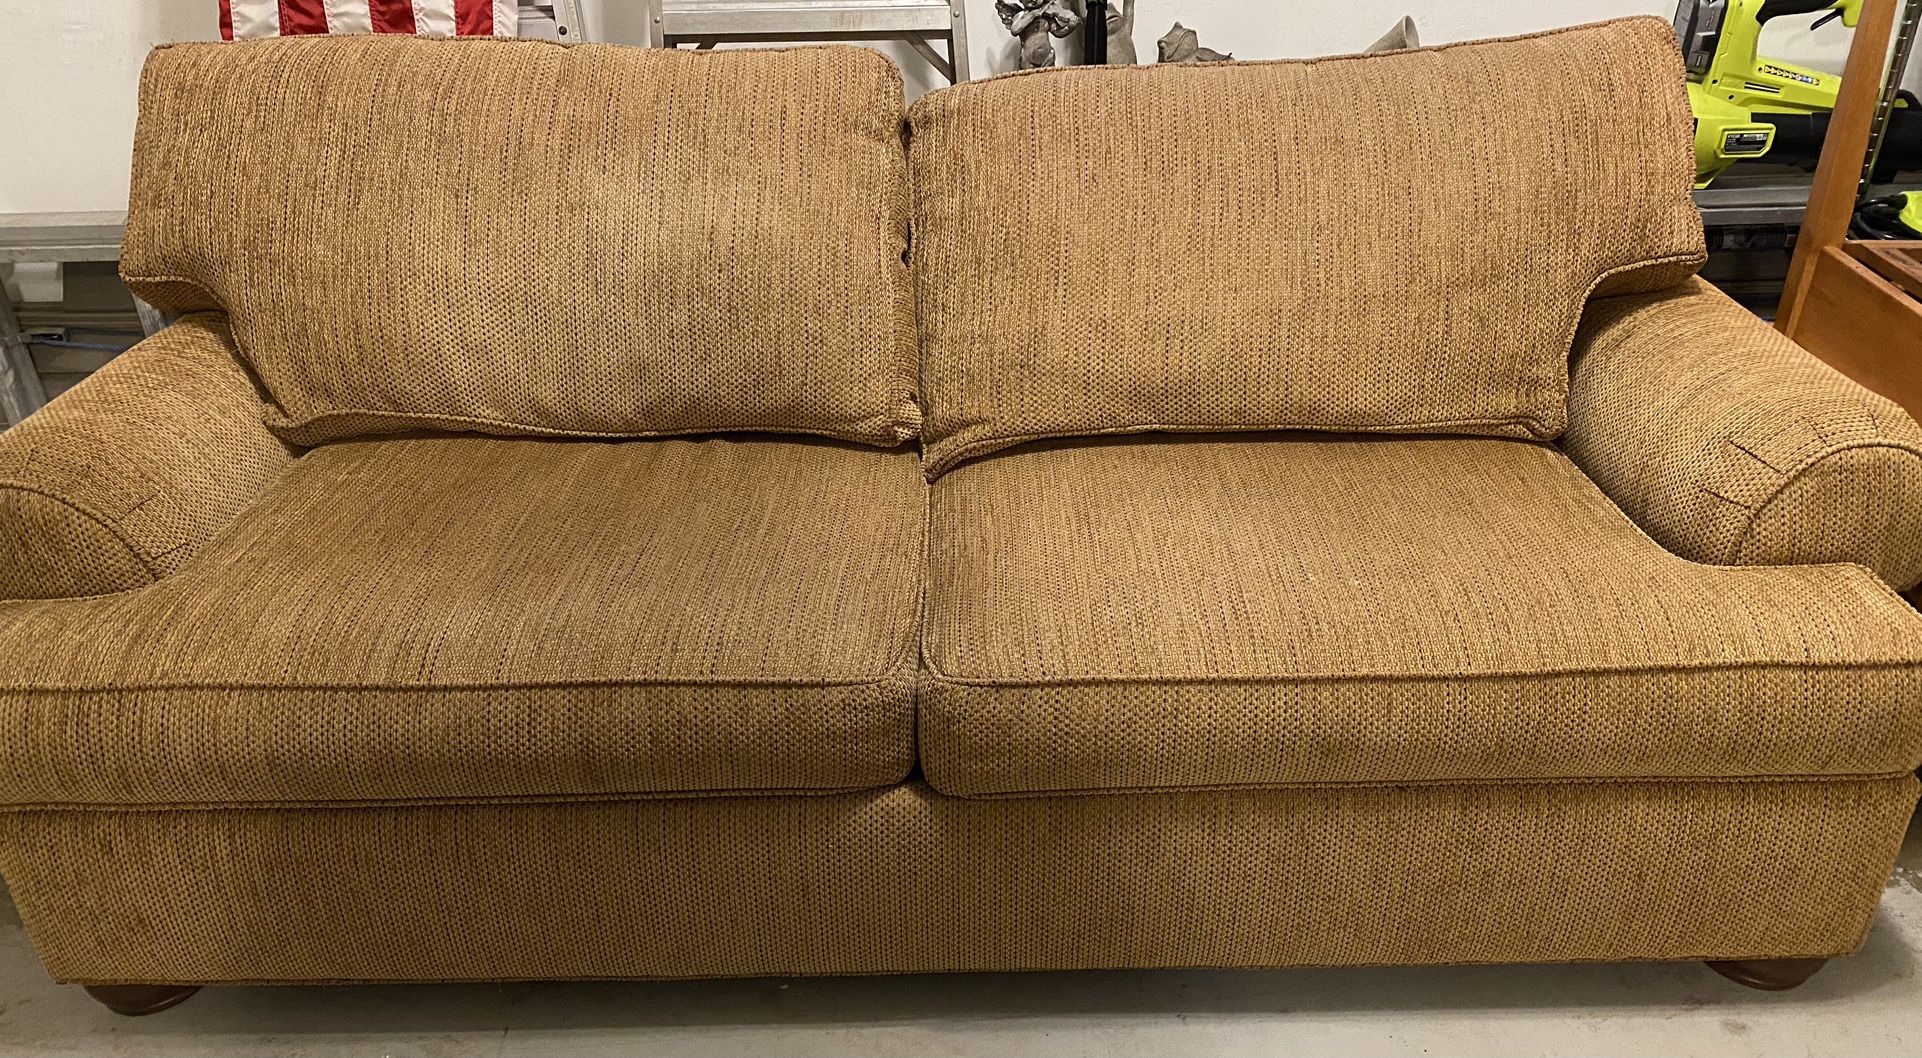 Free!!! First Come First Serve!  Ethan Allen Sofa